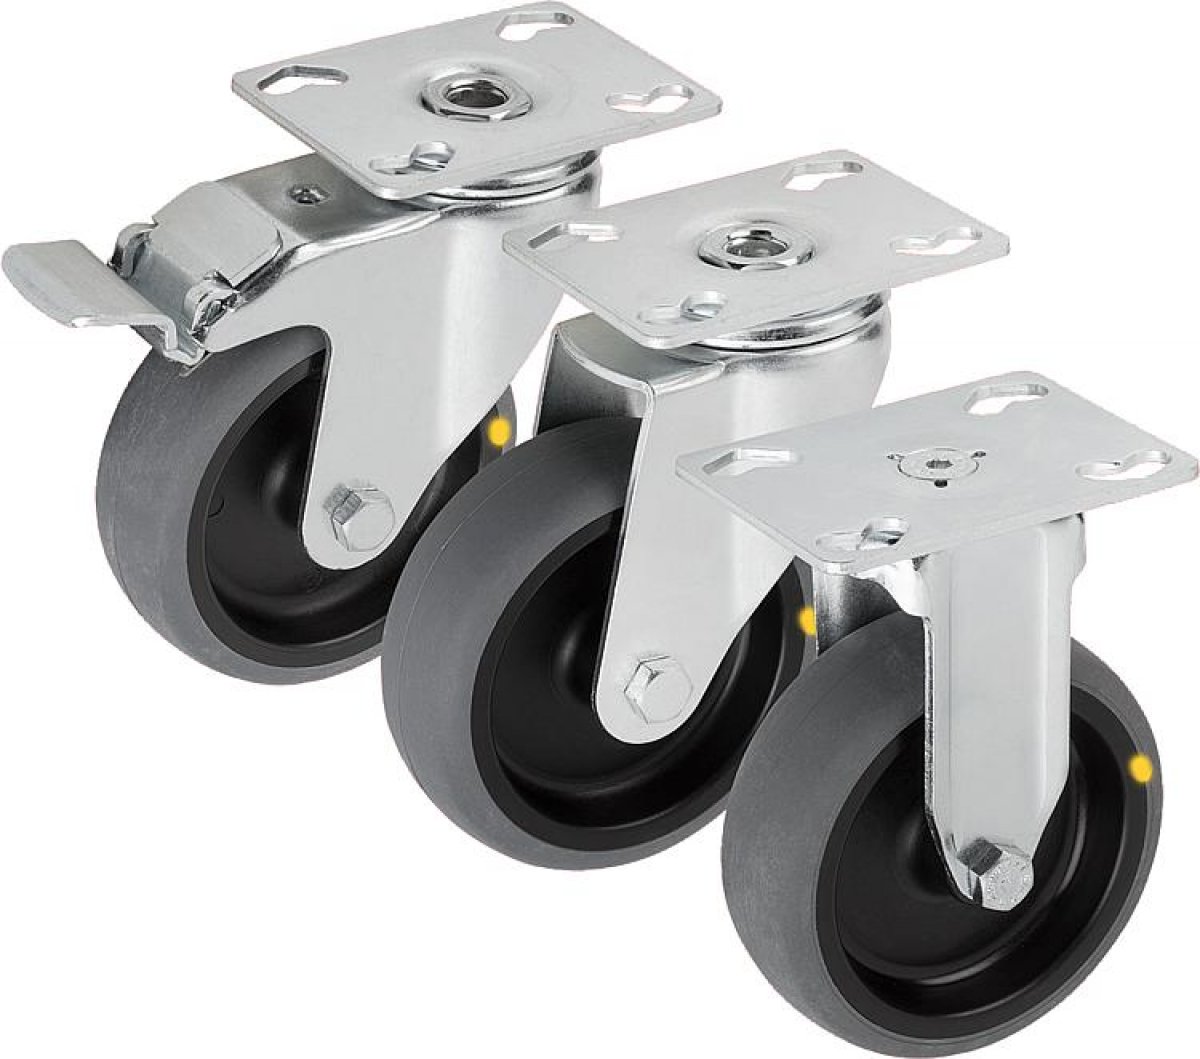 Swivel and fixed castors, steel plate, electrically conductive, heavy-duty versi